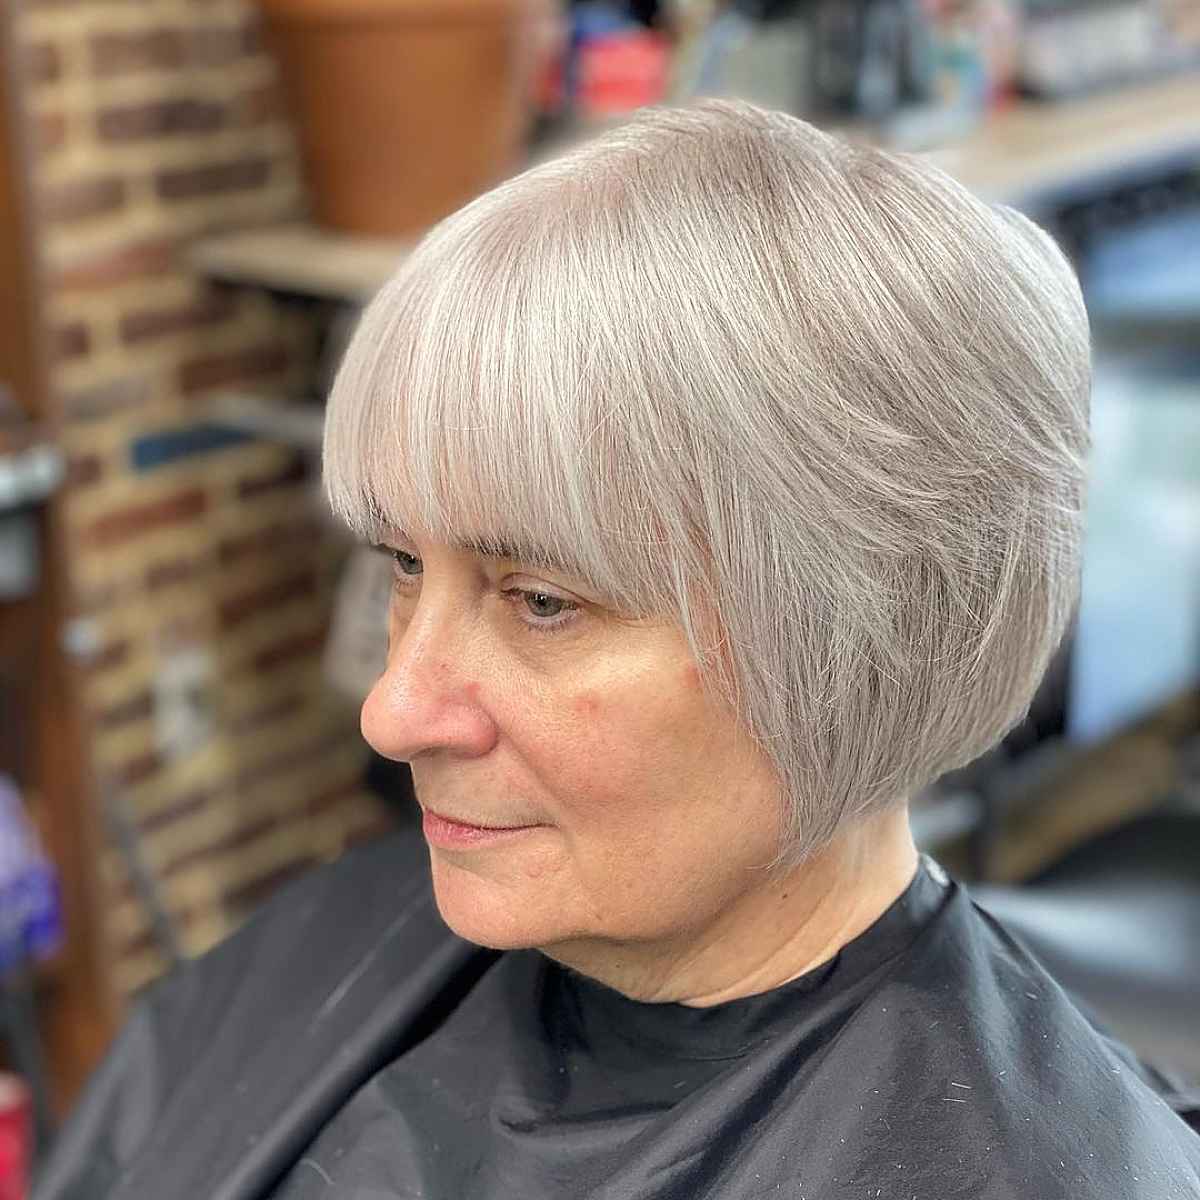 15 Angled Bobs for Women Over 60 Who Want a Chic Look